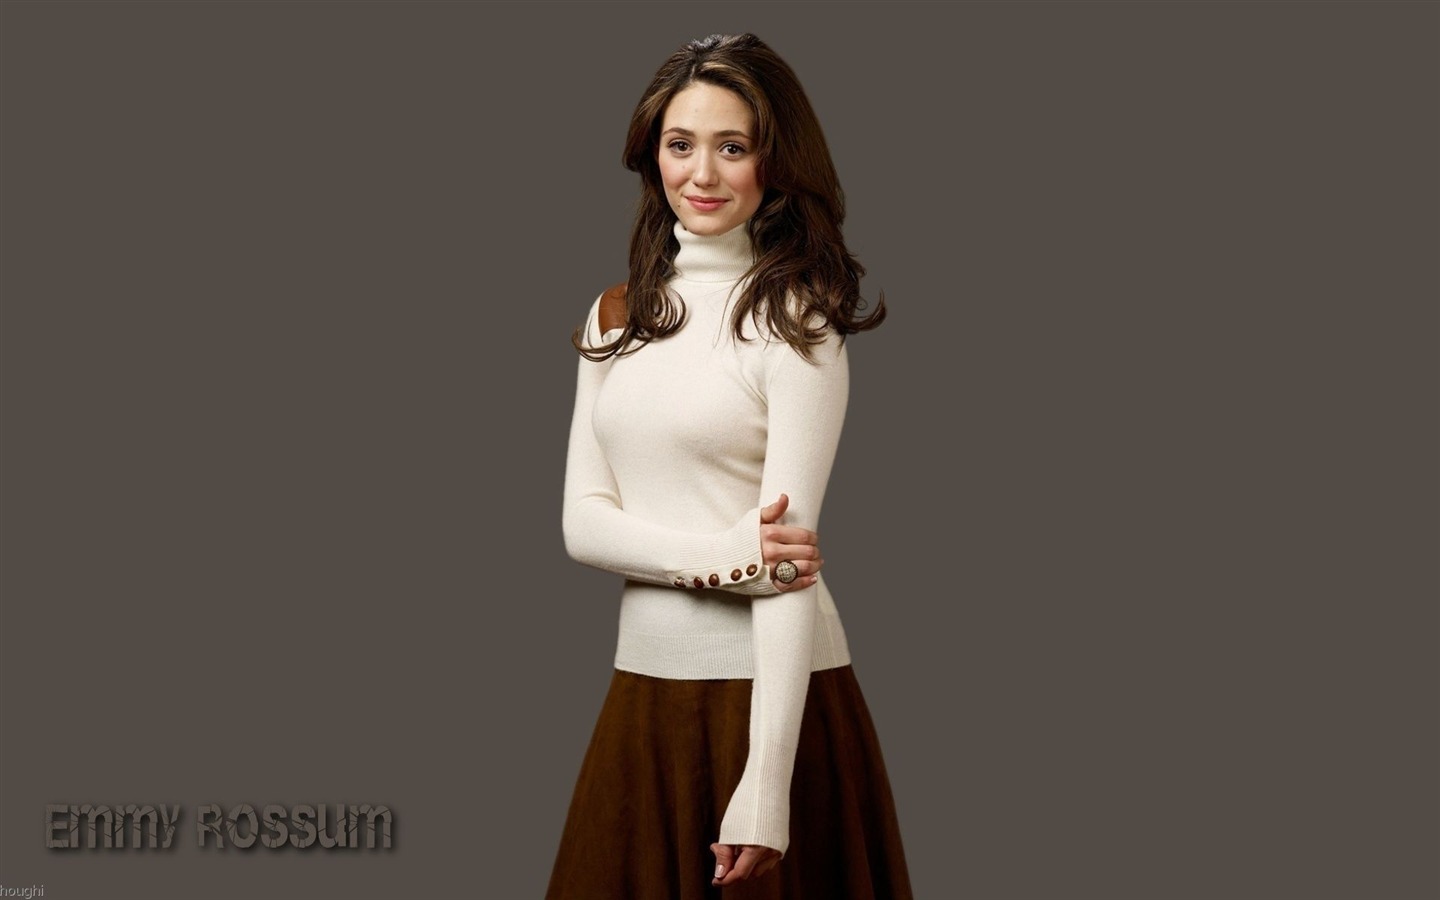 Emmy Rossum #005 - 1440x900 Wallpapers Pictures Photos Images